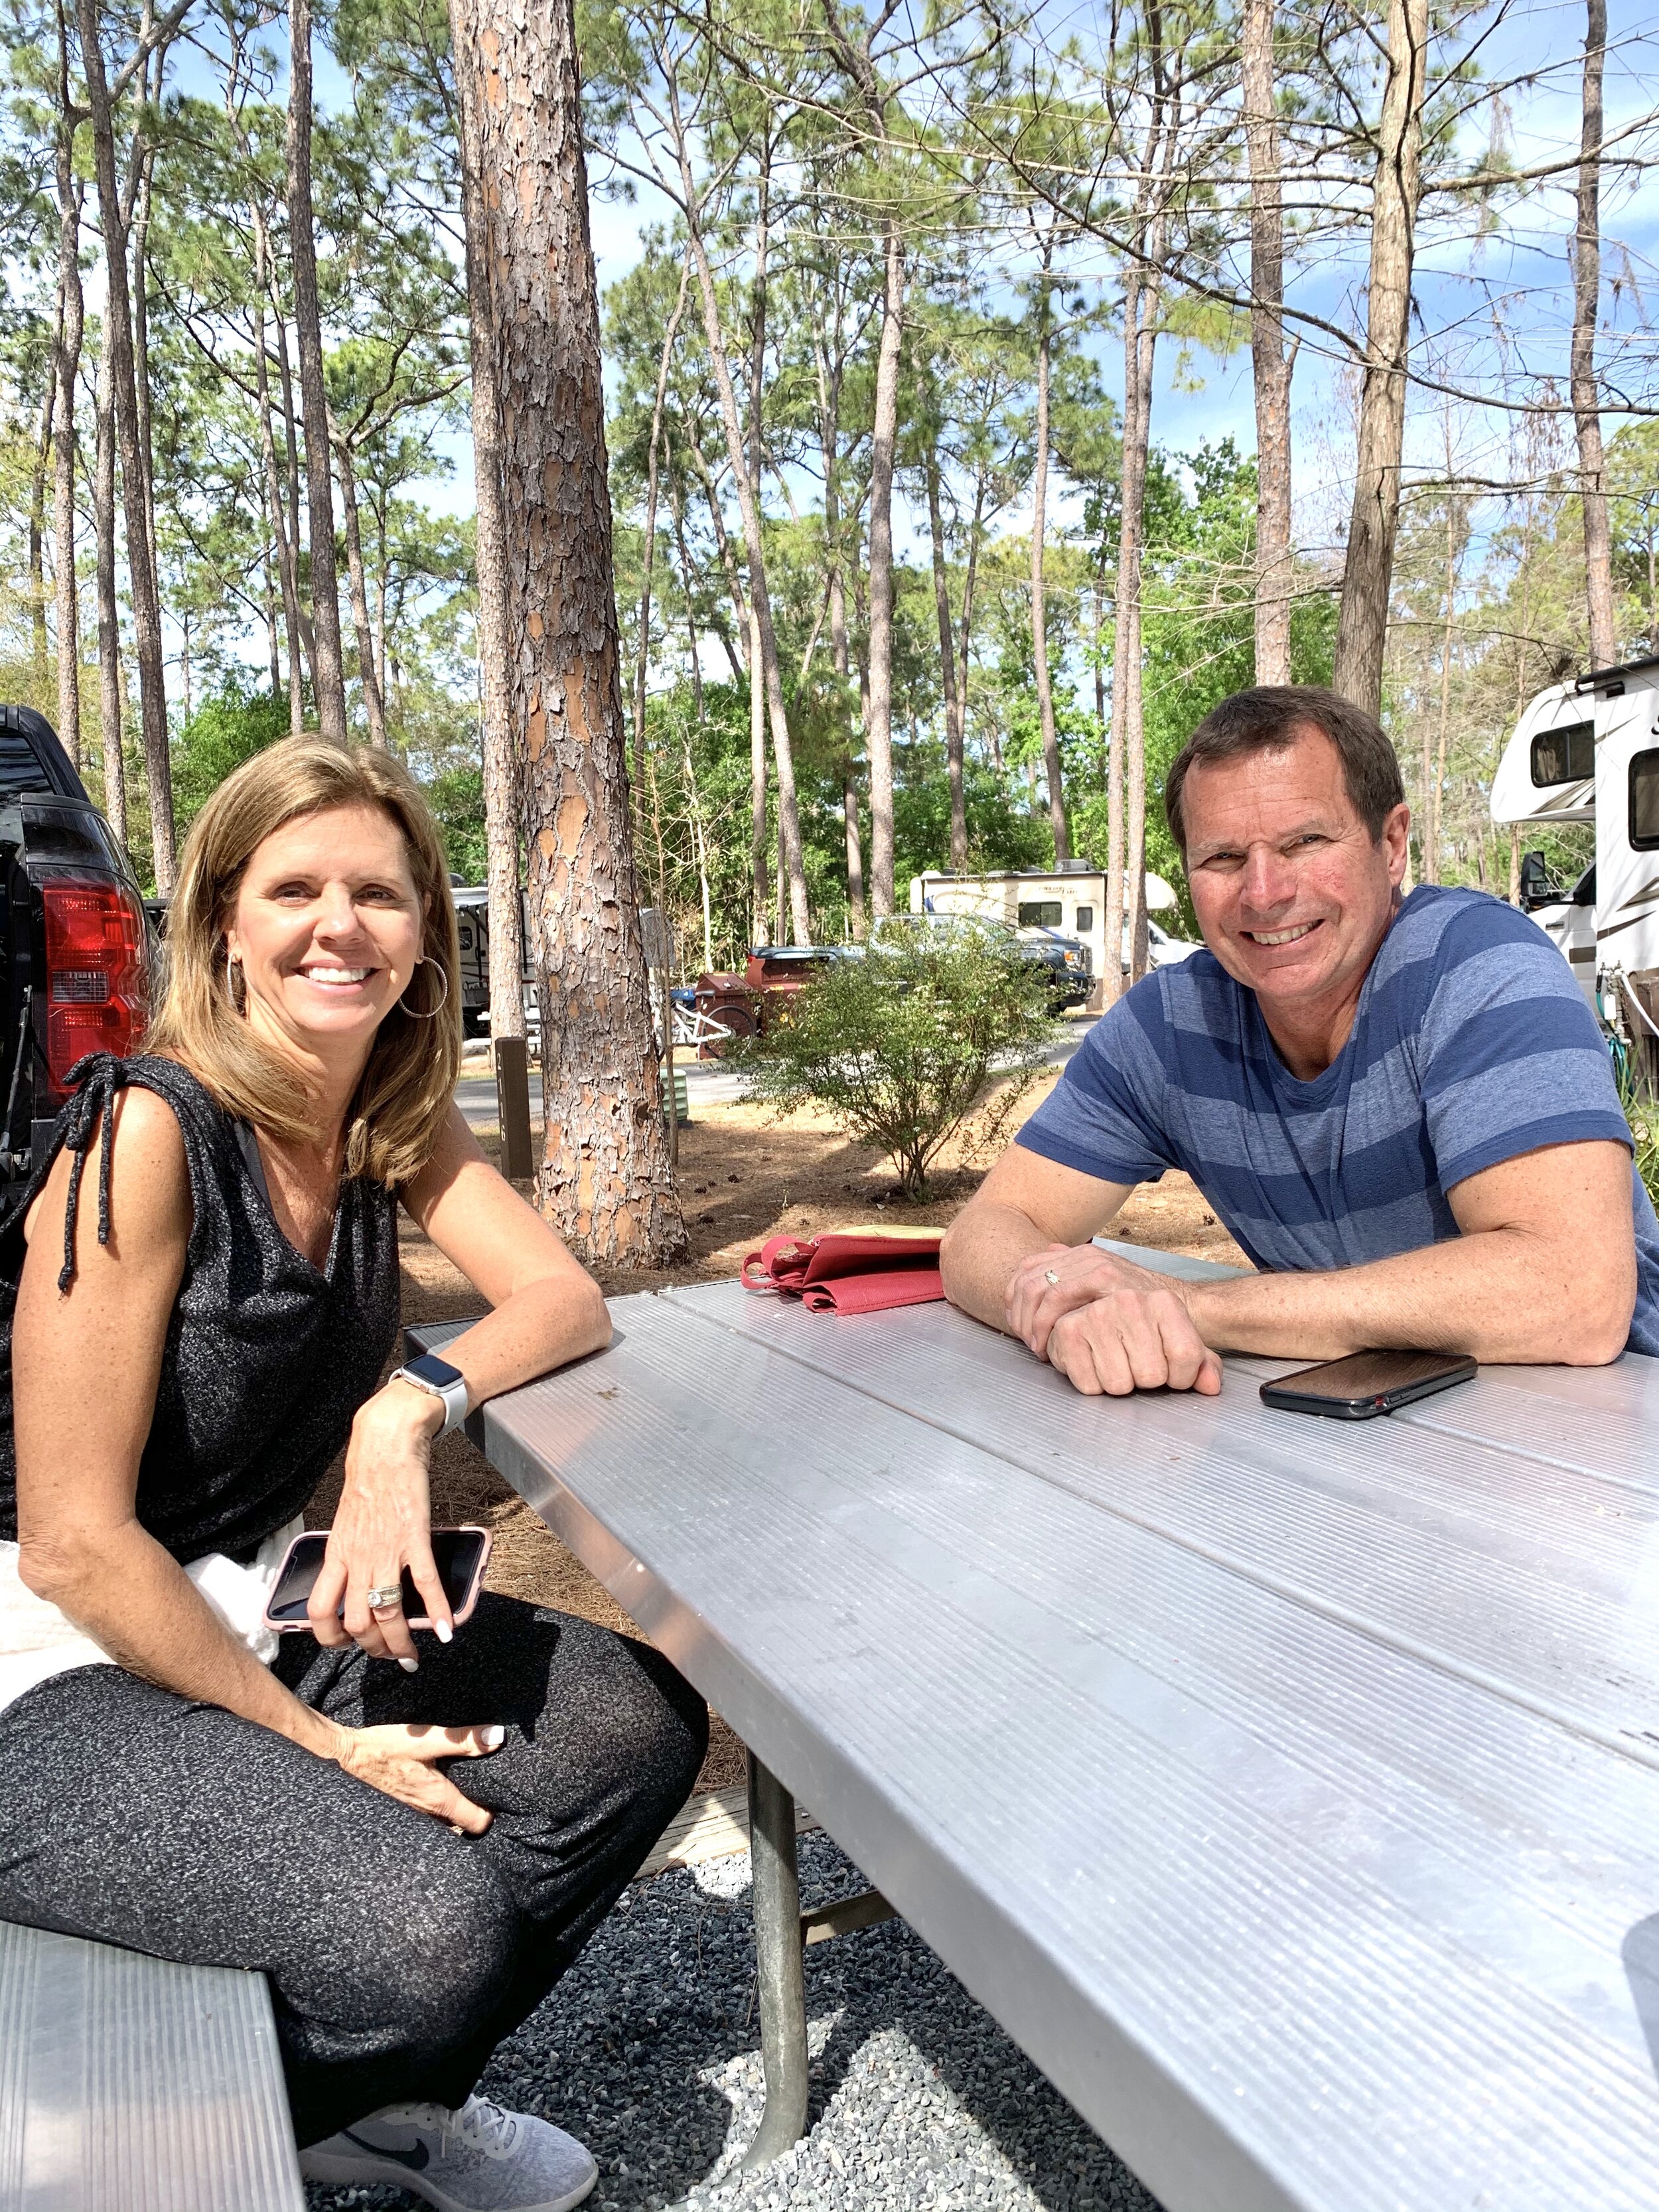  It was refreshing to see faces from home and to laugh with our dear friends, Rob and Angela Little. They brought their golf cart with them, and Clay thoroughly enjoyed the rides. 